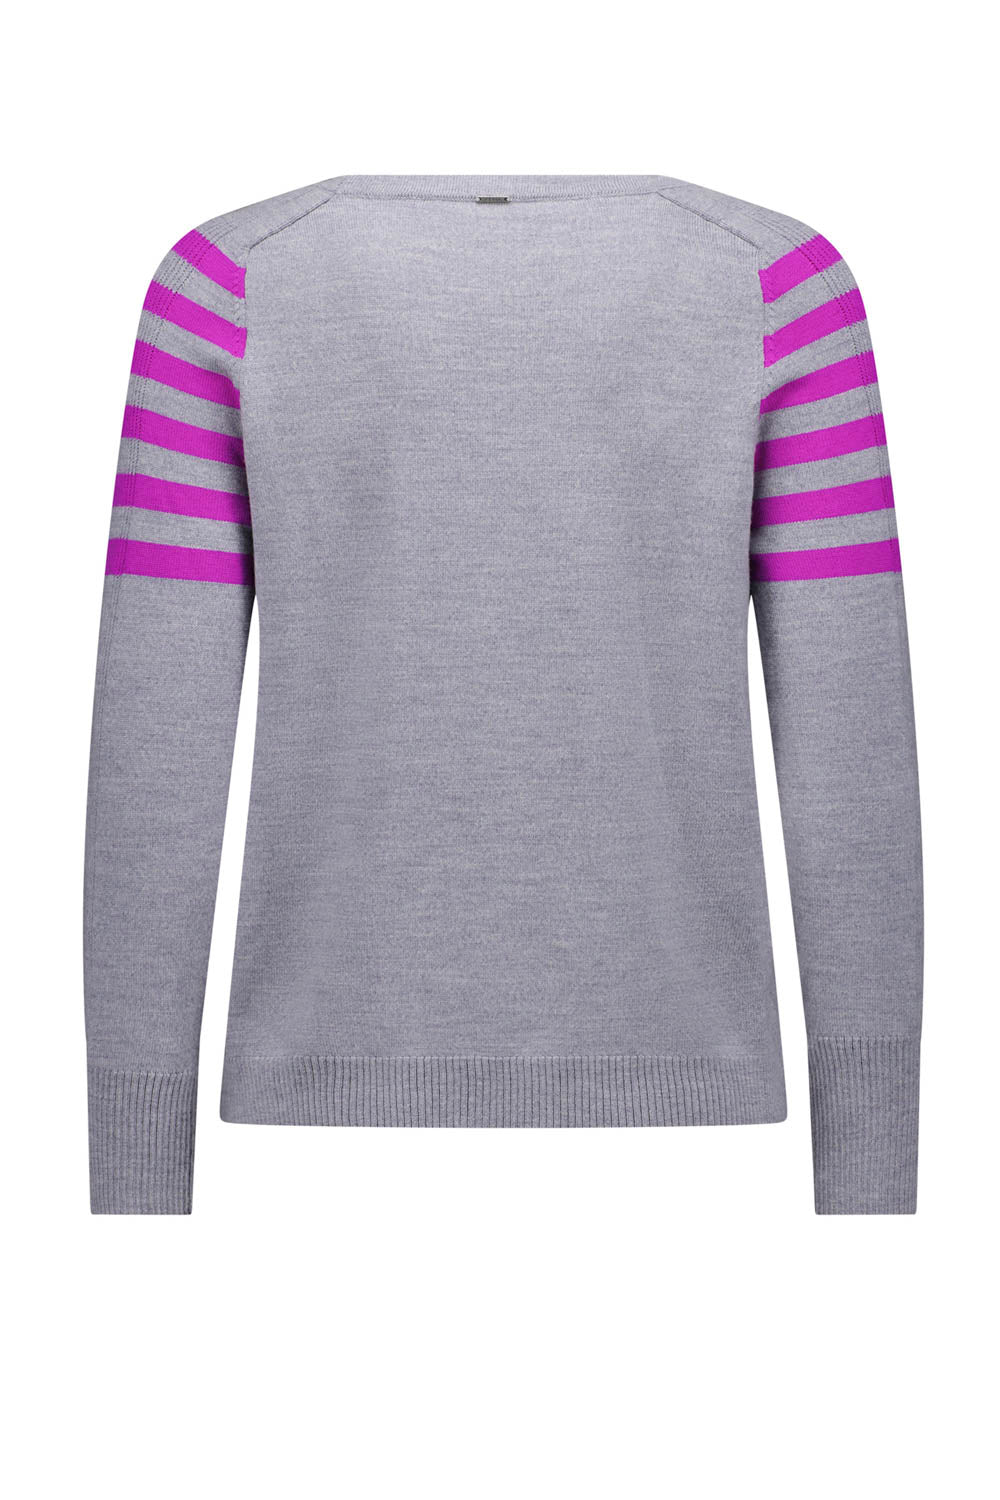 VERGE FLYNN SWEATER - SILVER MARLE - THE VOGUE STORE